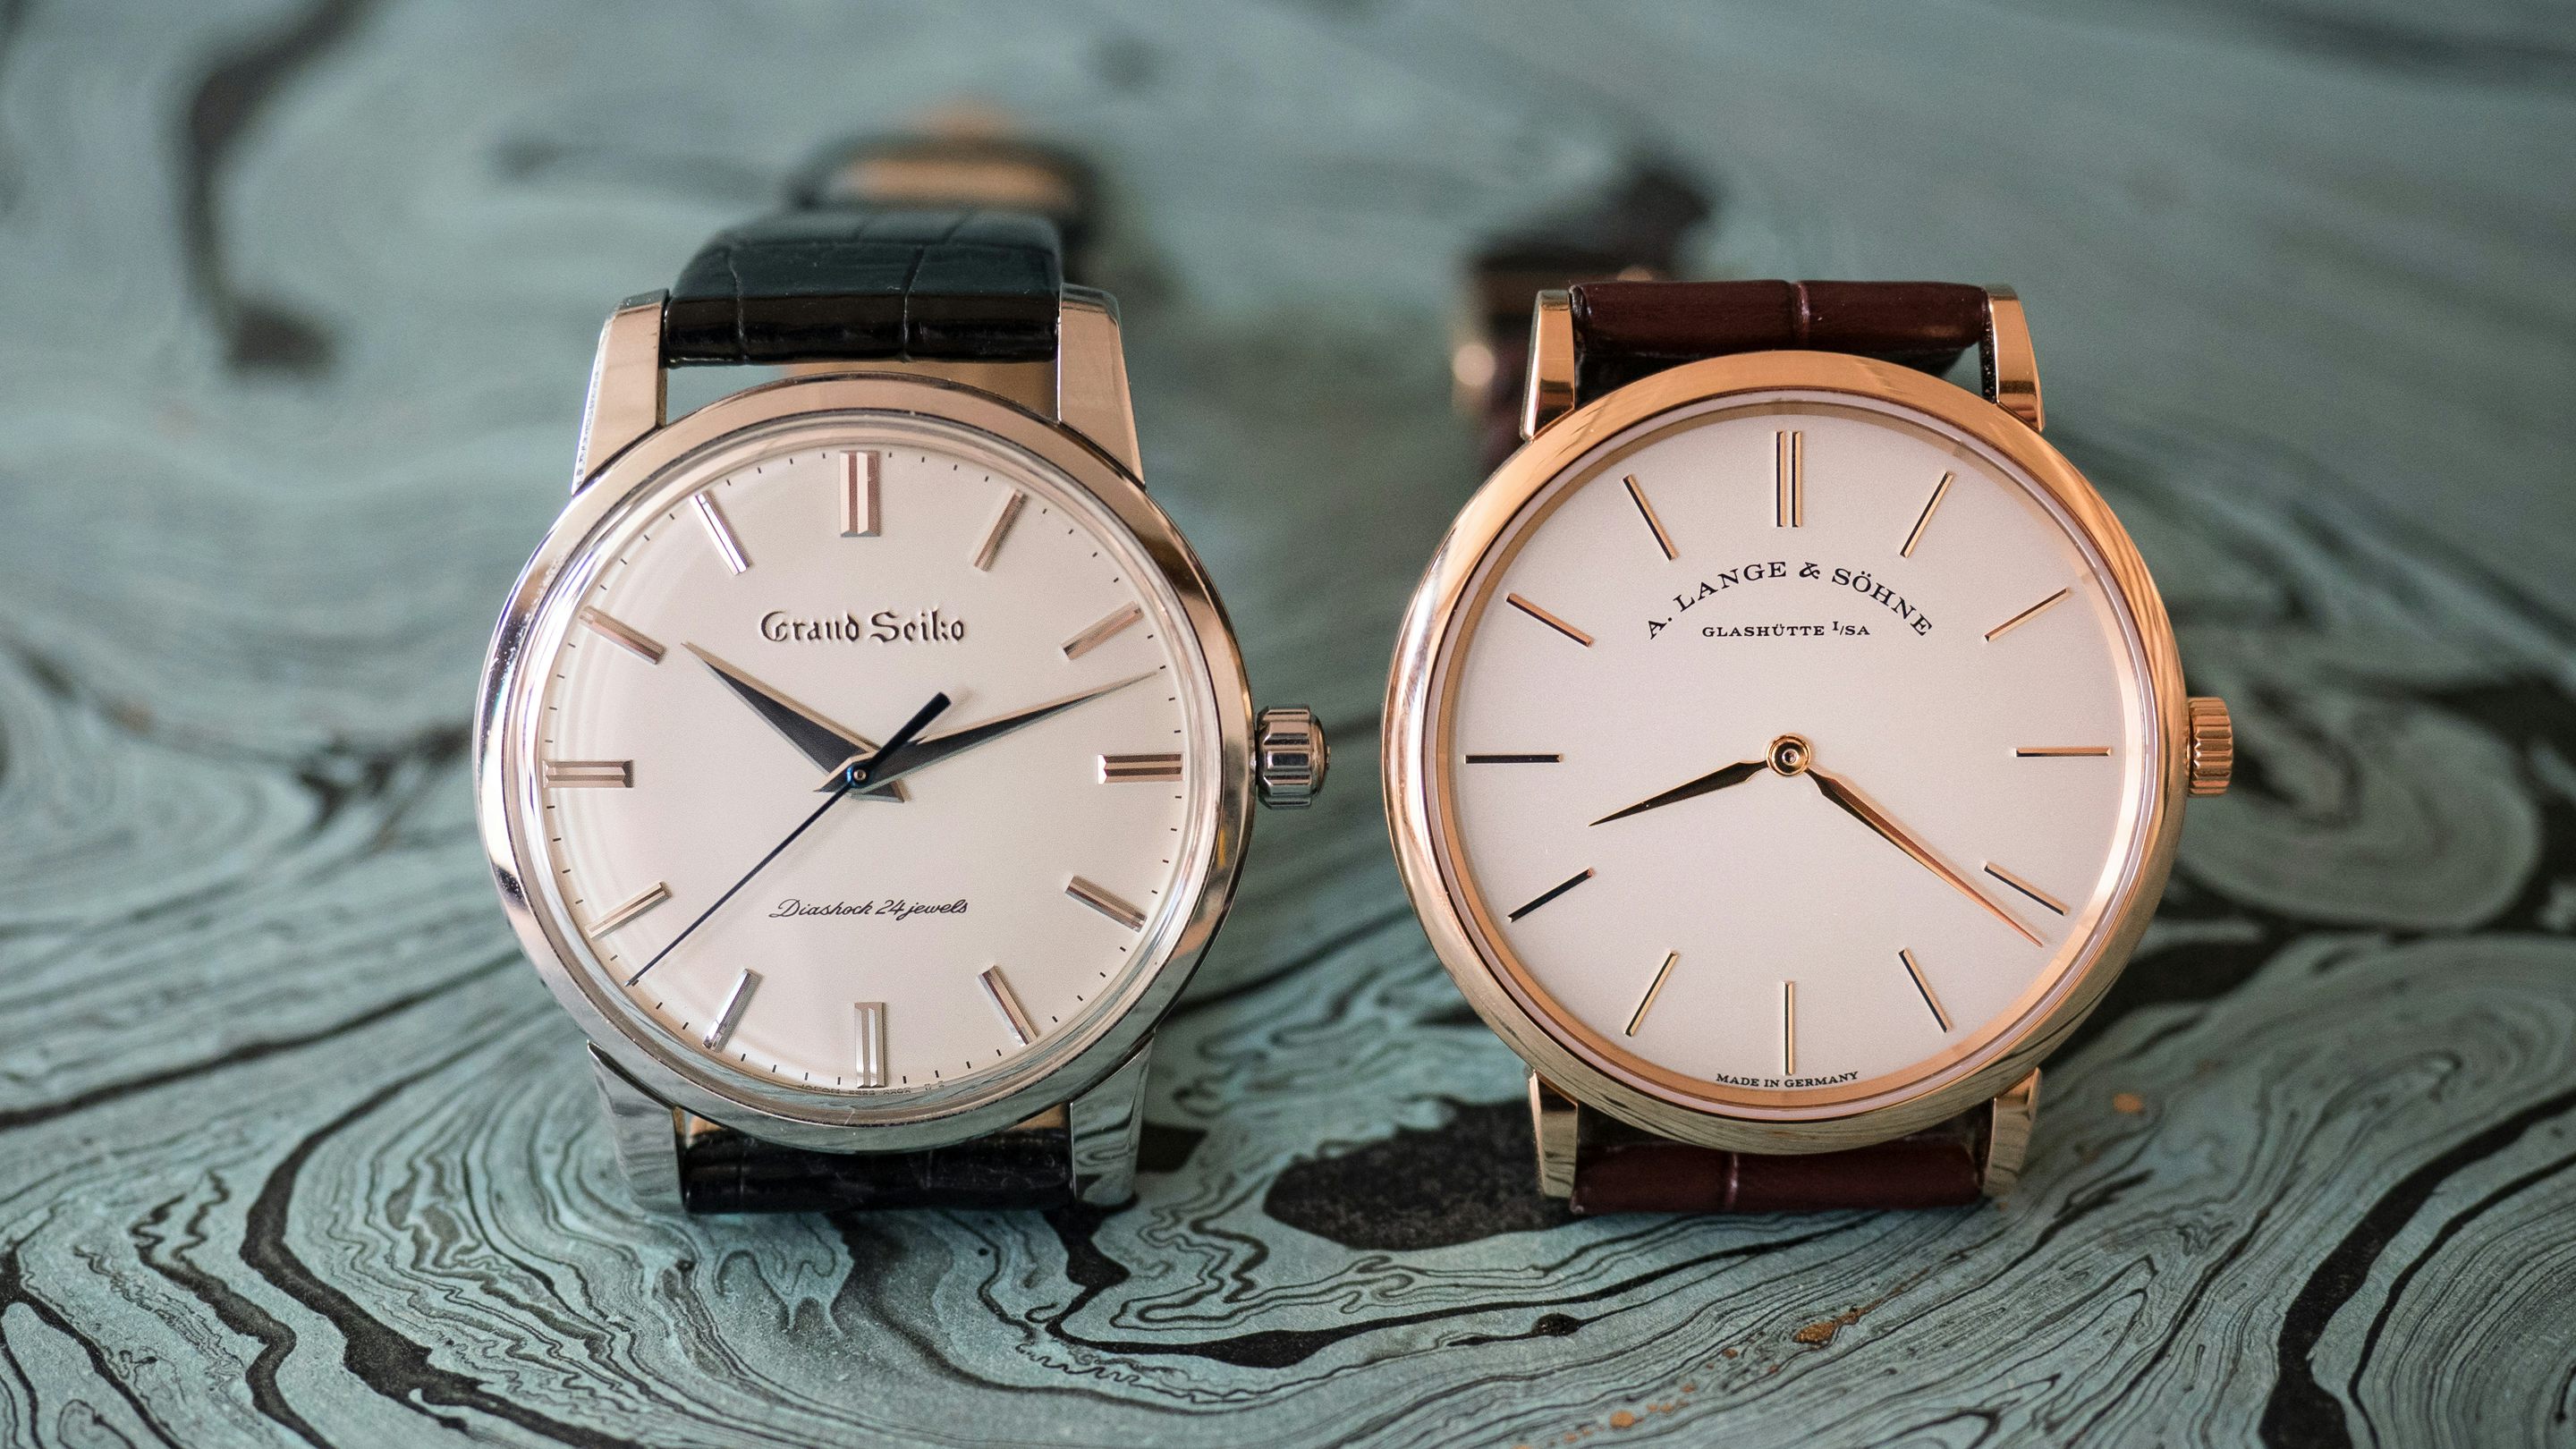 The Two Watch Collection: The Grand Seiko SBGW033 130th Anniversary Limited  Edition And The A. Lange & Söhne Saxonia Thin 37mm - Hodinkee